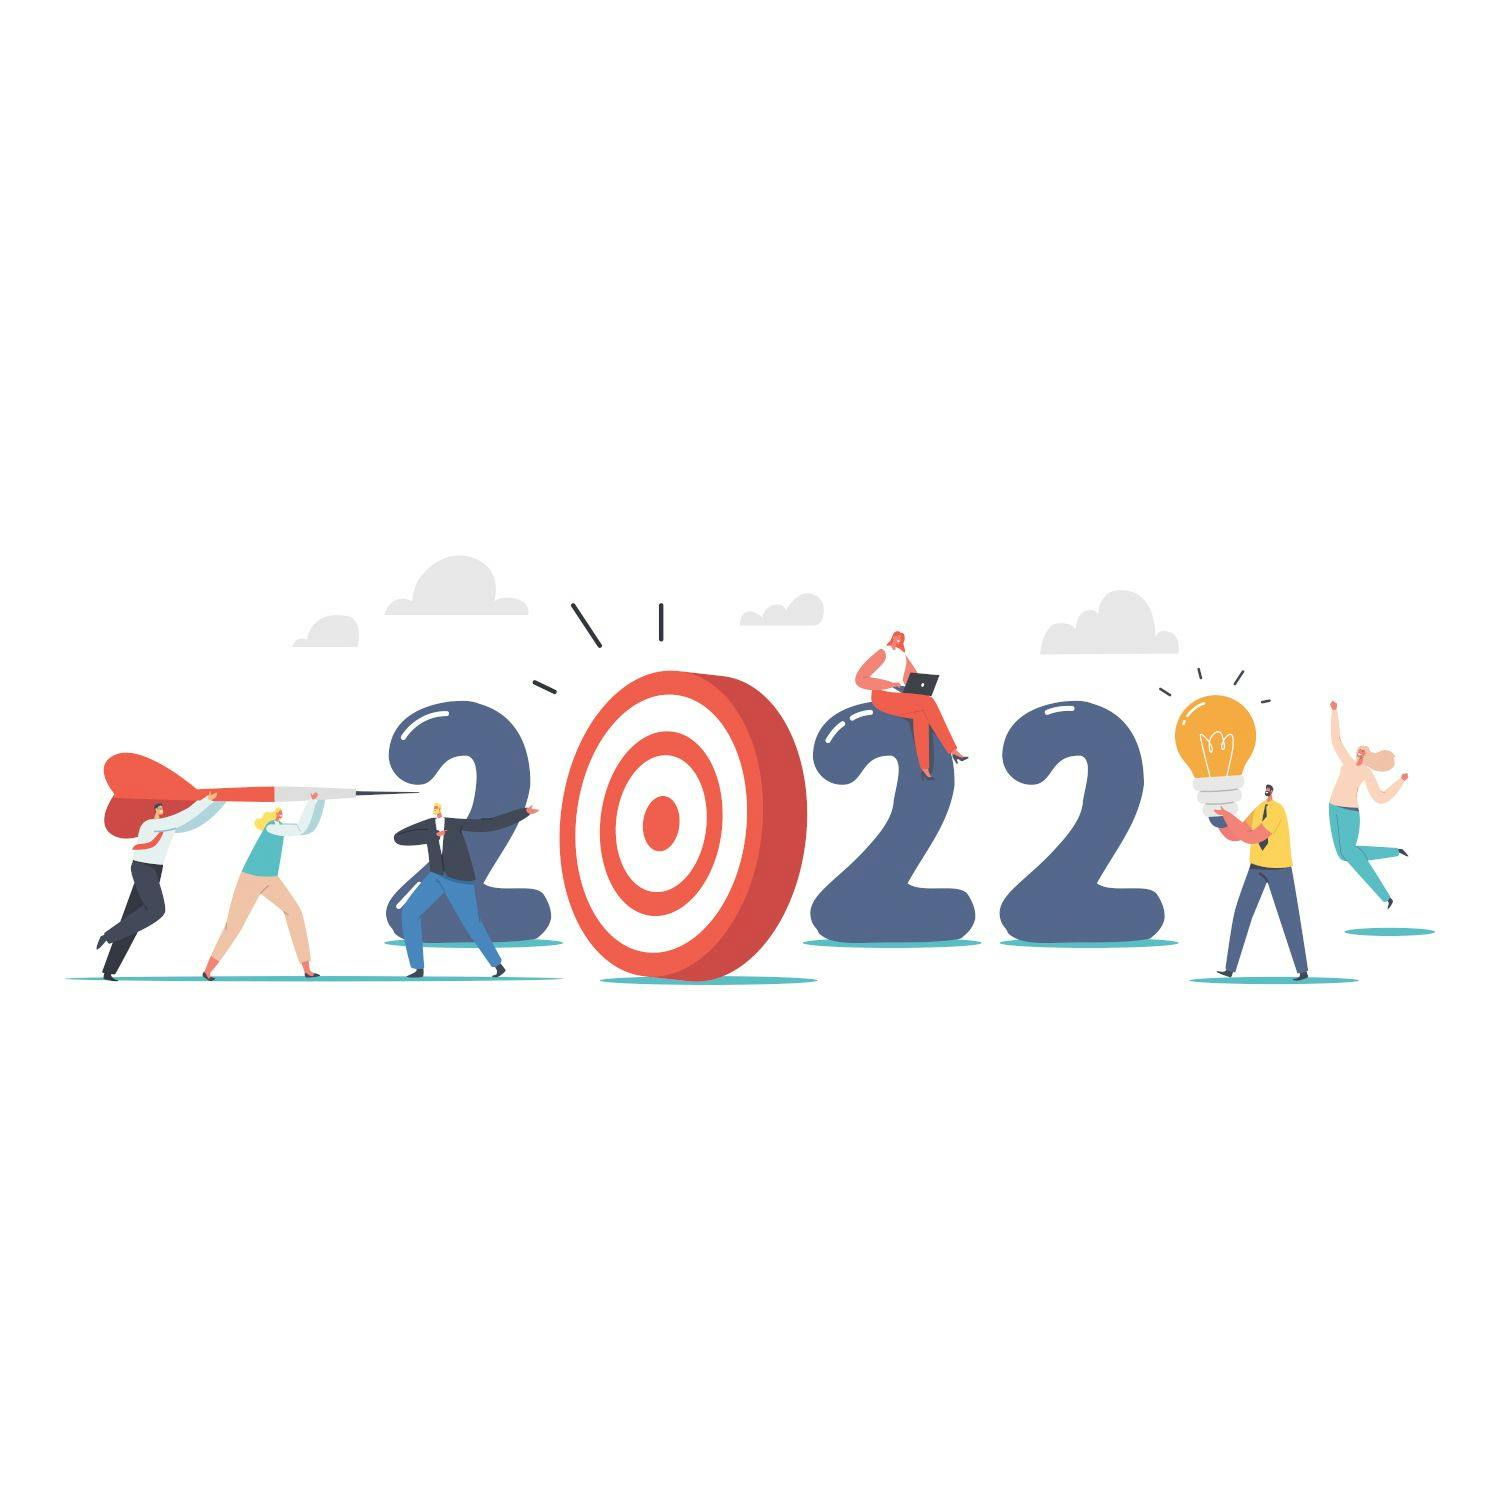 2022 Dietary supplement and natural product industry outlook: Insights from Nutritional Outlook’s Editorial Advisory Board